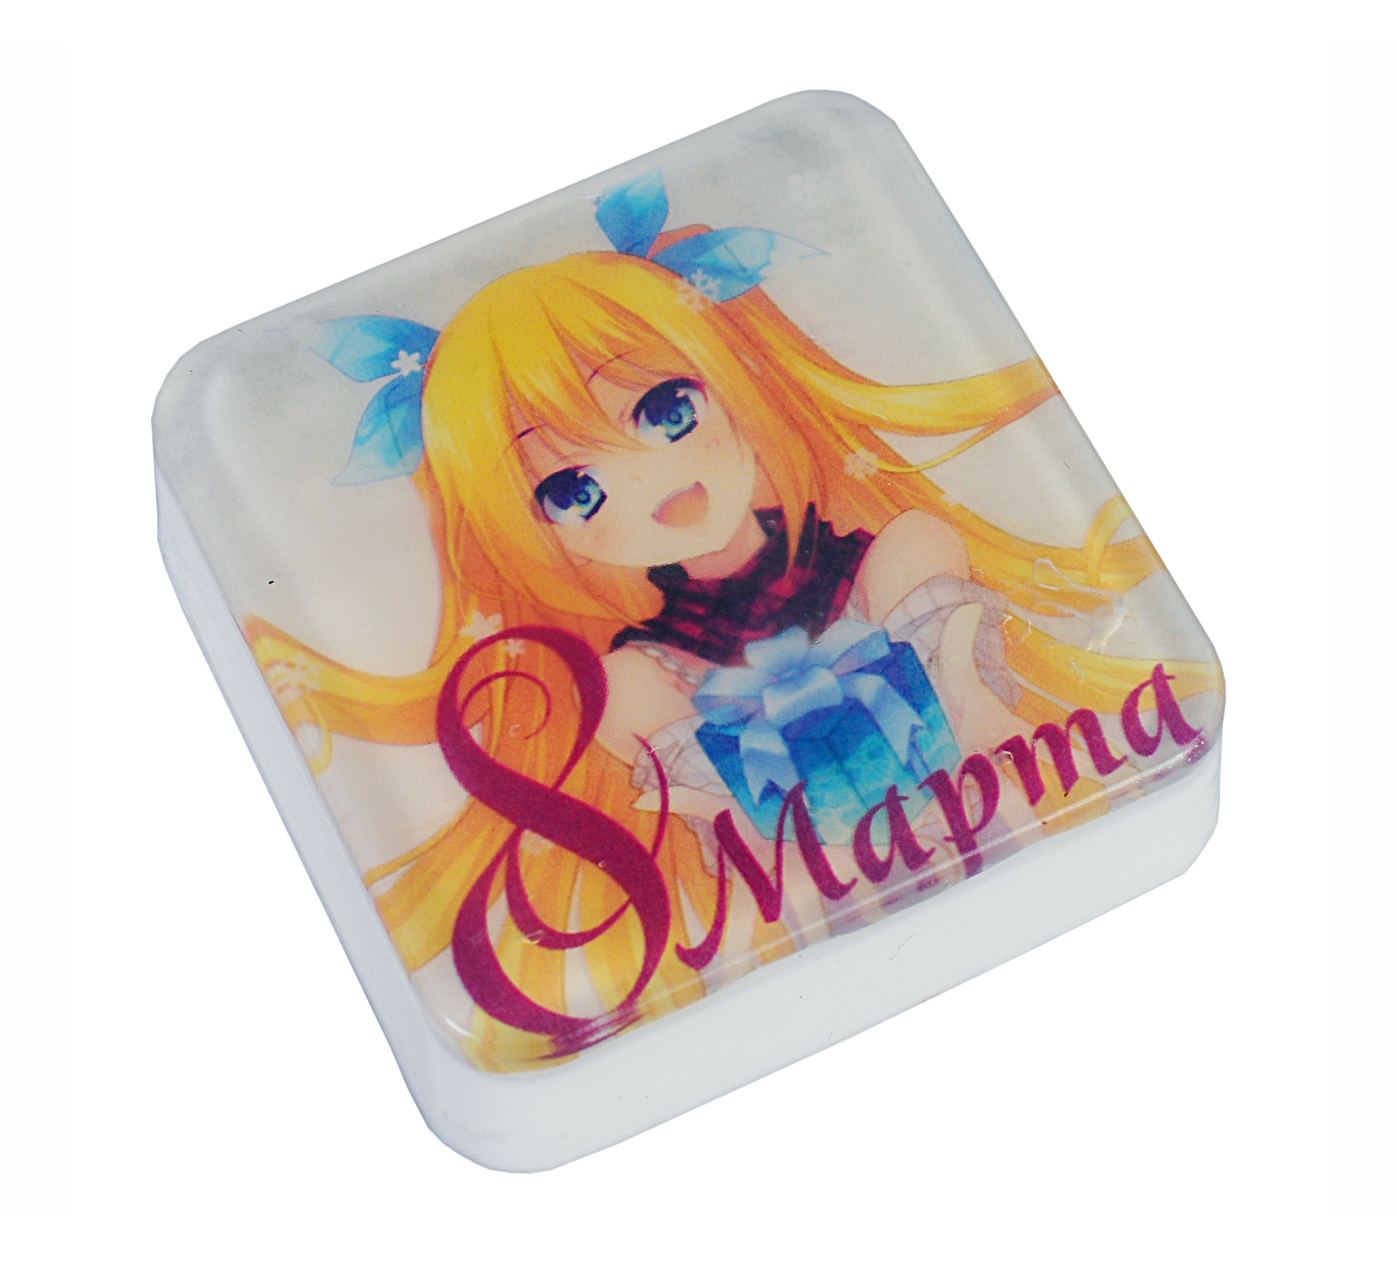 Anime soap with gift - buy in bulk on Qoovee Market.